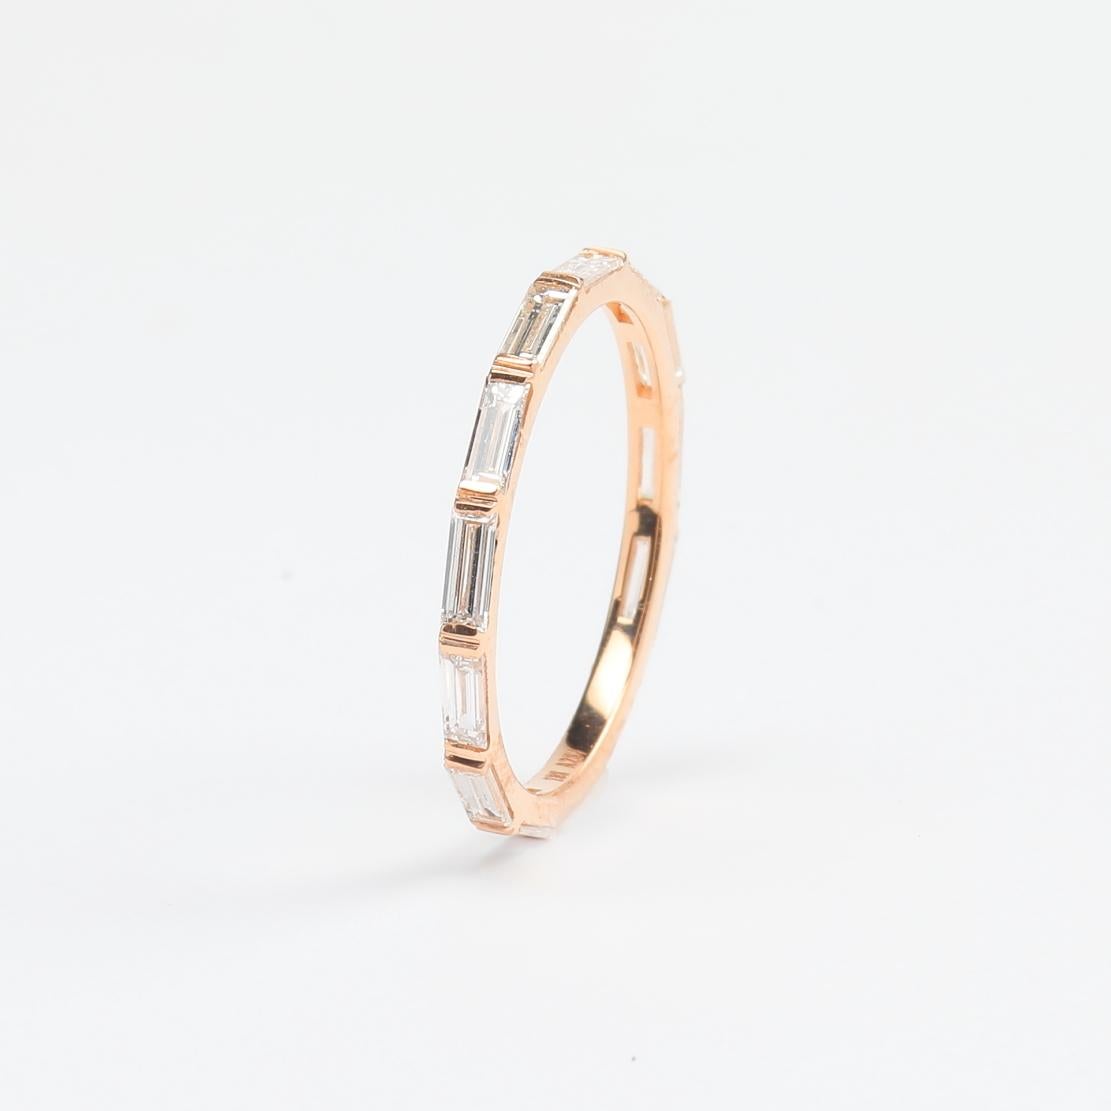 Classy and chic Stackable Diamond Wedding Band Ring, featuring:
✧ Prong set natural diamonds weighing 0.90 tcw (F-G color, VS clarity)
✧ Approximately 1.80 grams of 18K Rose Gold
✧ Free appraisal included with your purchase
✧ Comes with beautiful